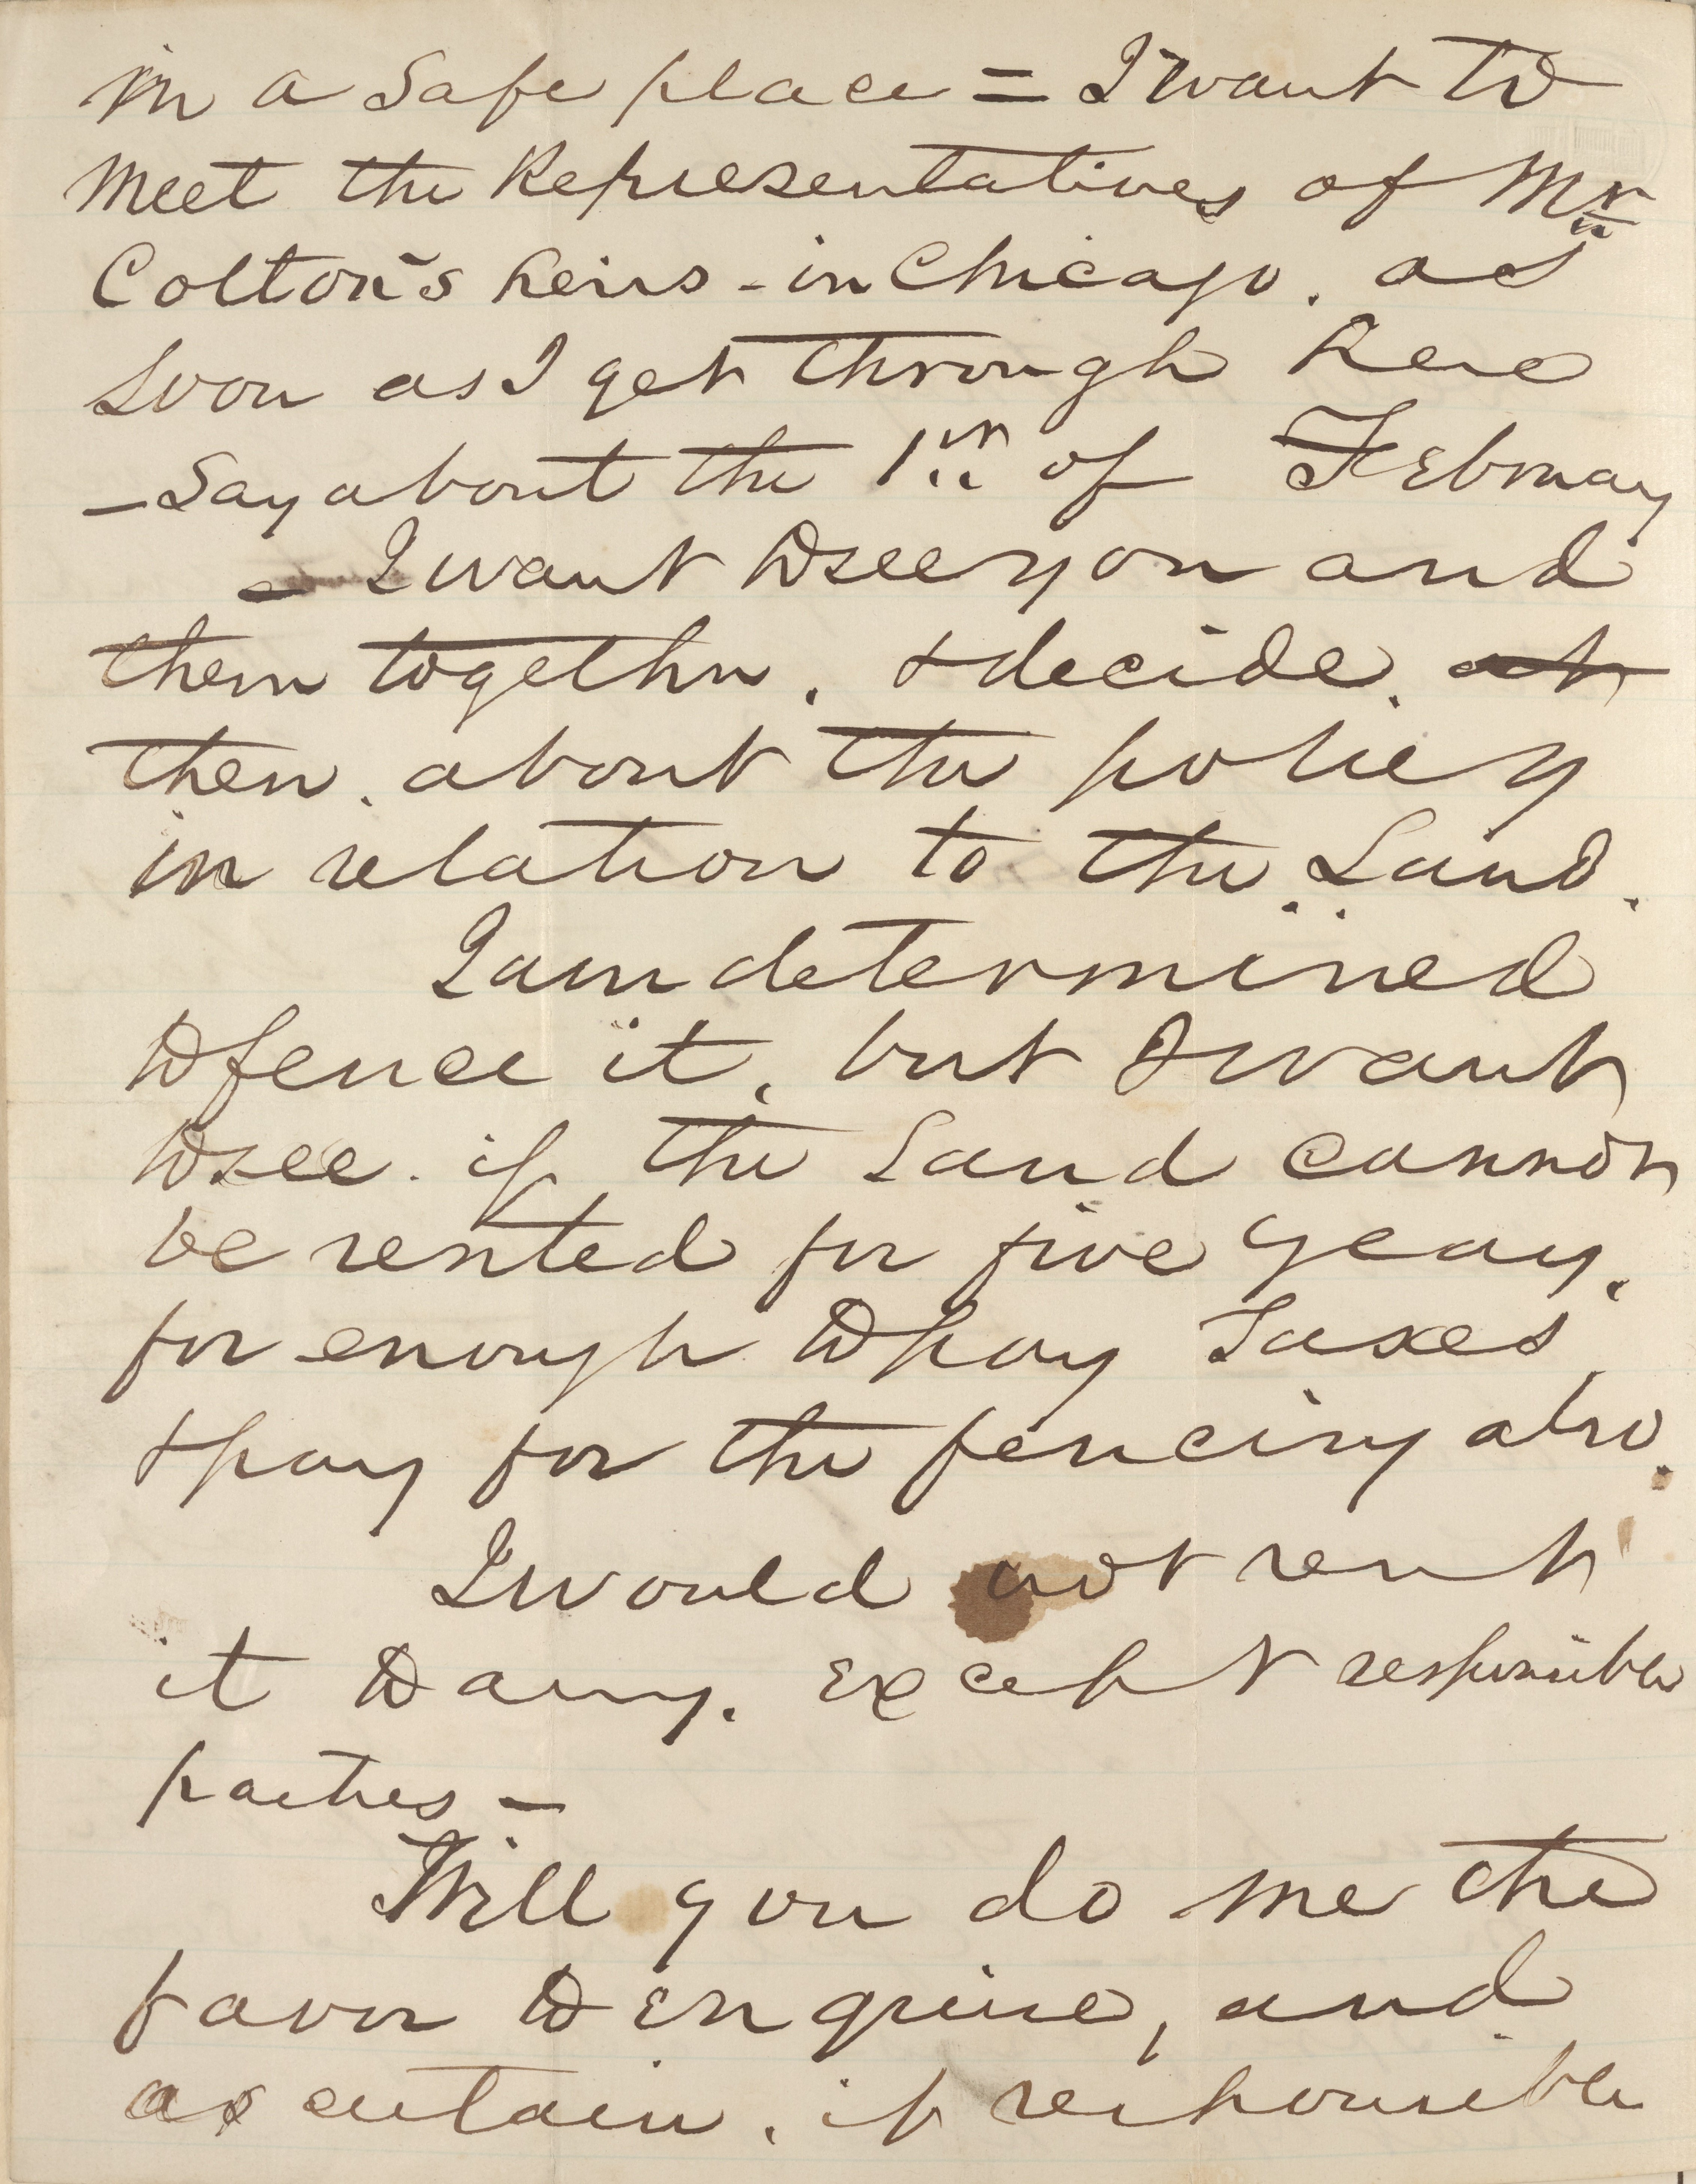 Digital image of handwritten letter from David Davis to Henry Clay Whitney, 10 December 1861, Page 2